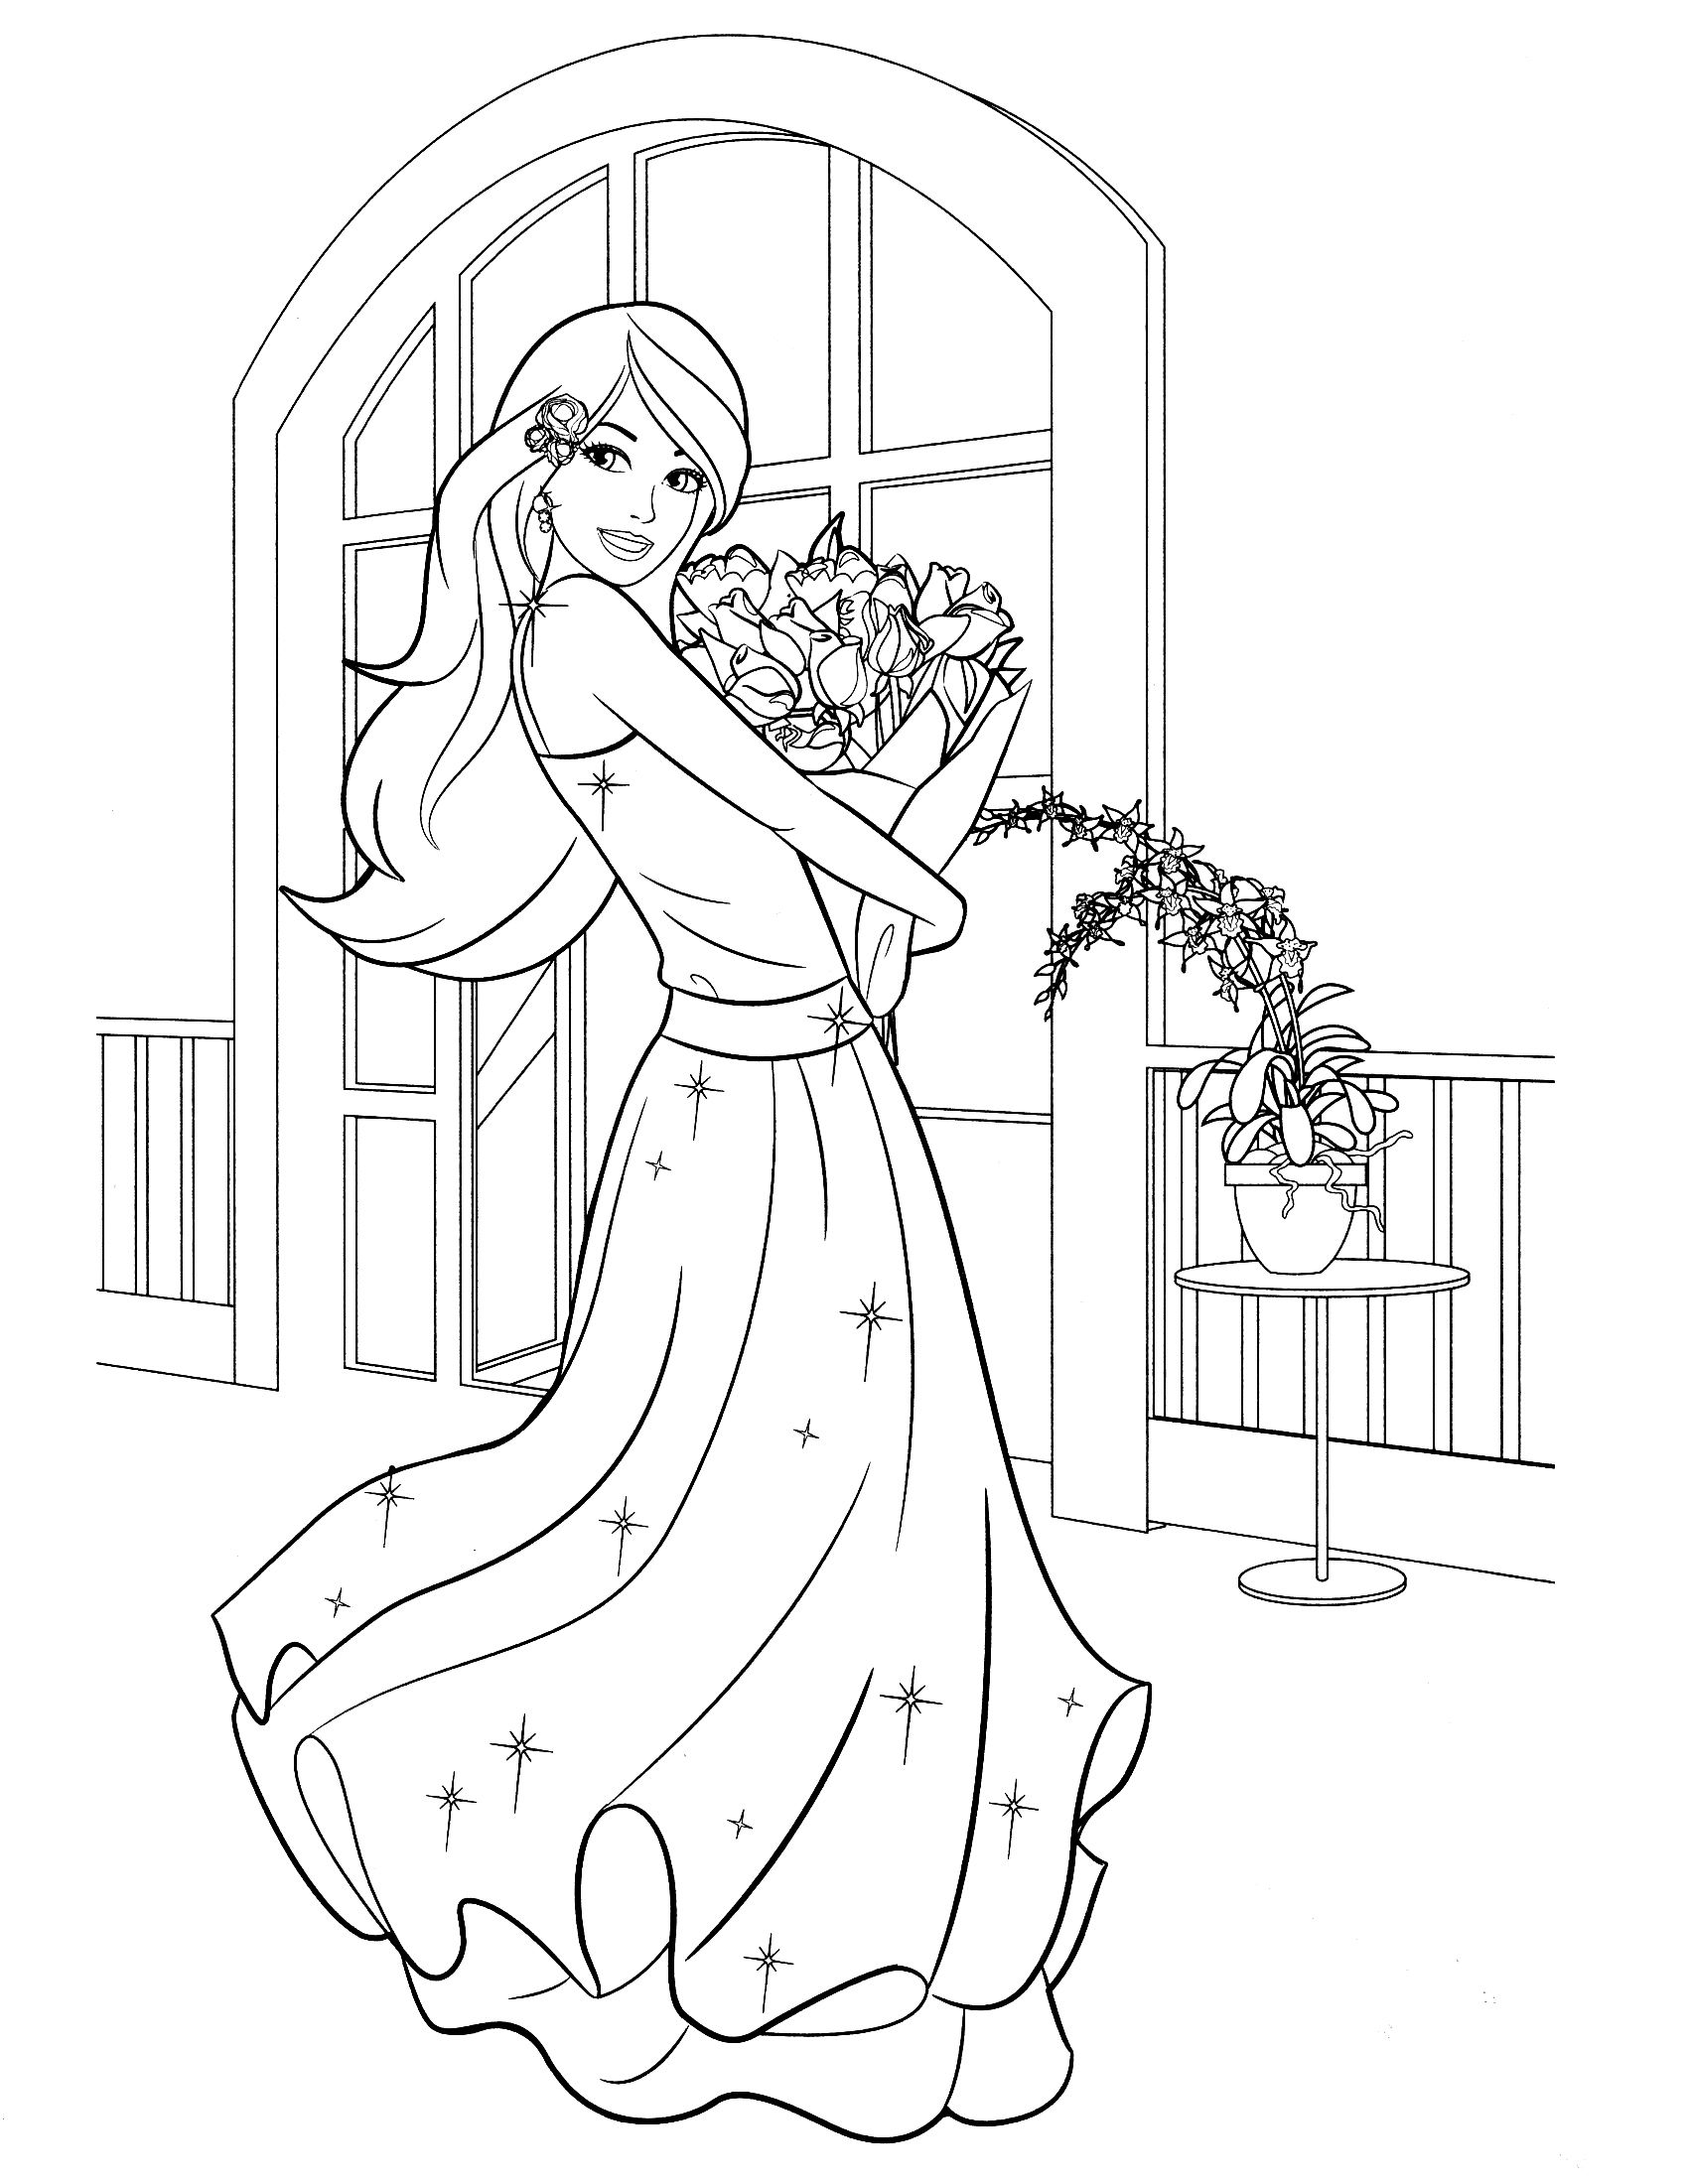 Barbie Birthday Coloring Pages at GetColorings.com   Free ...